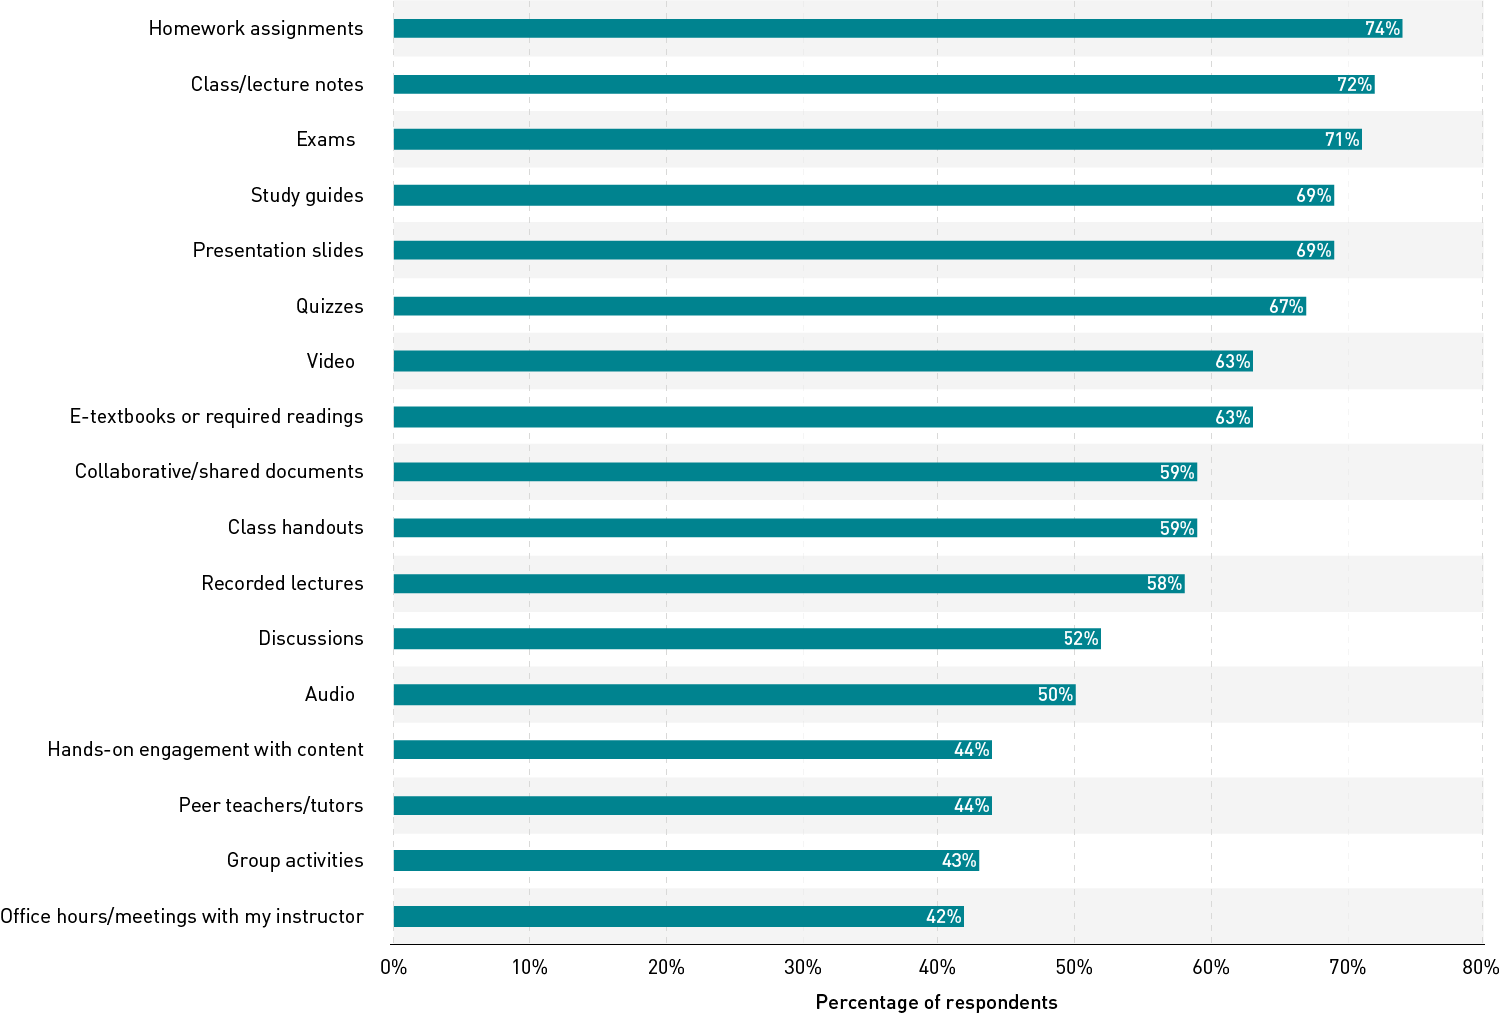 Bar chart of a list of instructional elements and the percentage of respondents who indicated that each element is very or extremely important to have online. For each element, the percentage of respondents ranges from 42% to 74%. In descending order, the elements are homework assignments, class or lecture notes, exams, study guides, presentation slides, quizzes, video, e-textbooks or required readings, collaborative or shared documents, class handouts, recorded lectures, discussions, audio, hands-on engagement with content, peer teachers or tutors, group activities, and office hours or meetings with instructors.